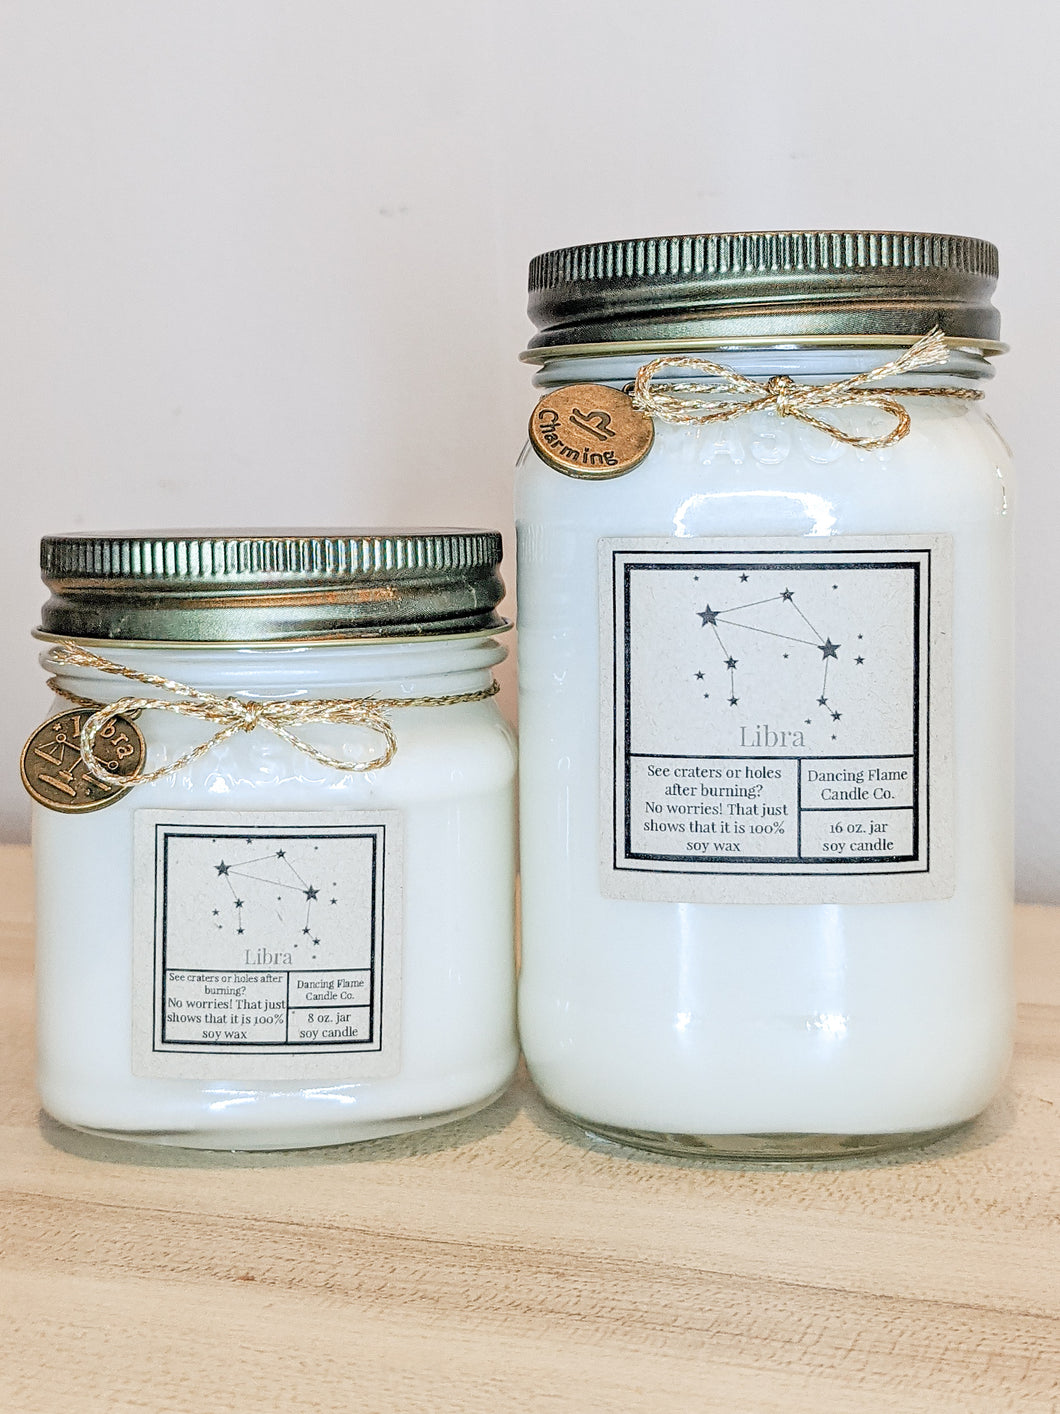 Libra Soy Wax Candle